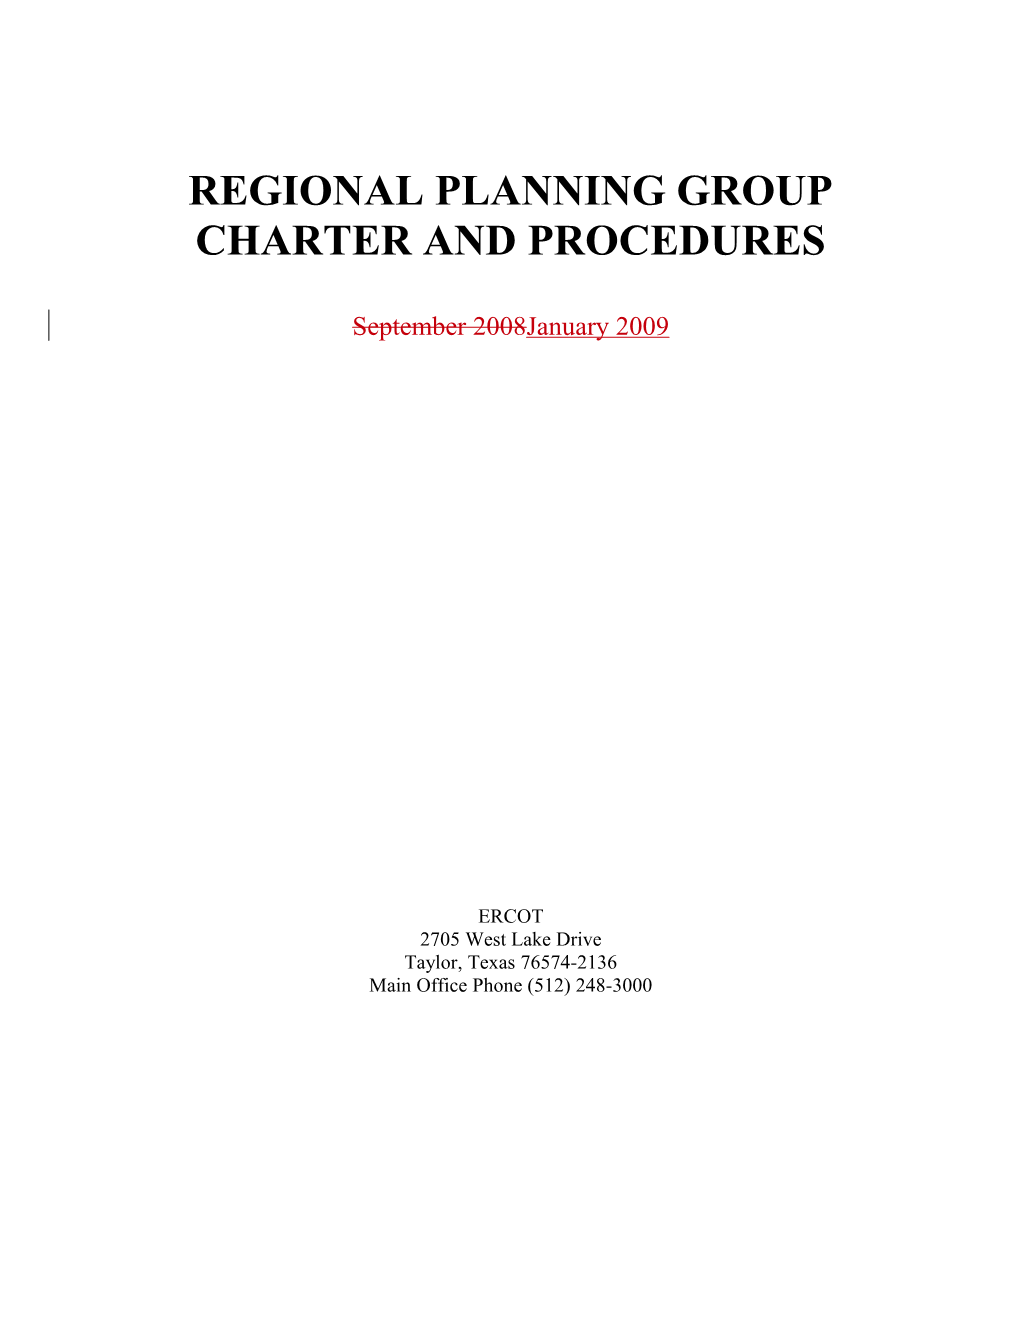 ERCOT REGIONAL PLANNING GROUP CHARTER and PROCEDURES January 2009